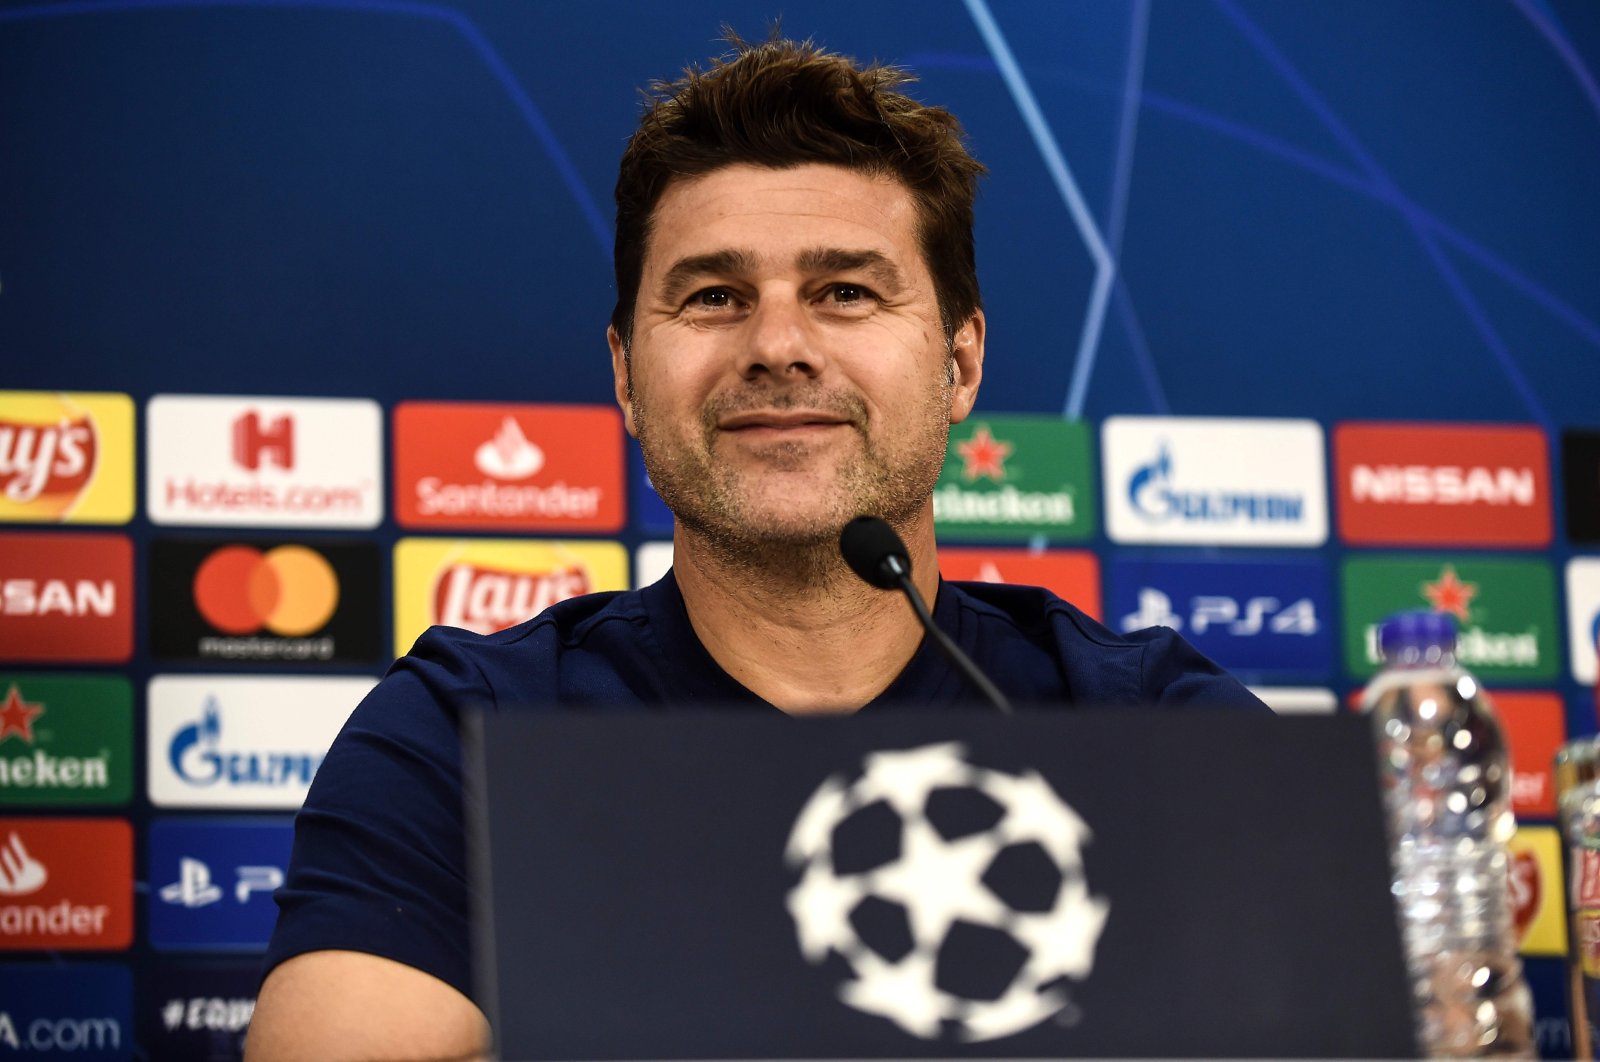 This file photo shows Tottenham Hotspur's Argentinian head coach Mauricio Pochettino addressing a press conference in Athens on the eve of the UEFA Champions League Group B football match between Olympiacos and Tottenham Hotspur, on Sept. 17, 2019. (AFP Photo)